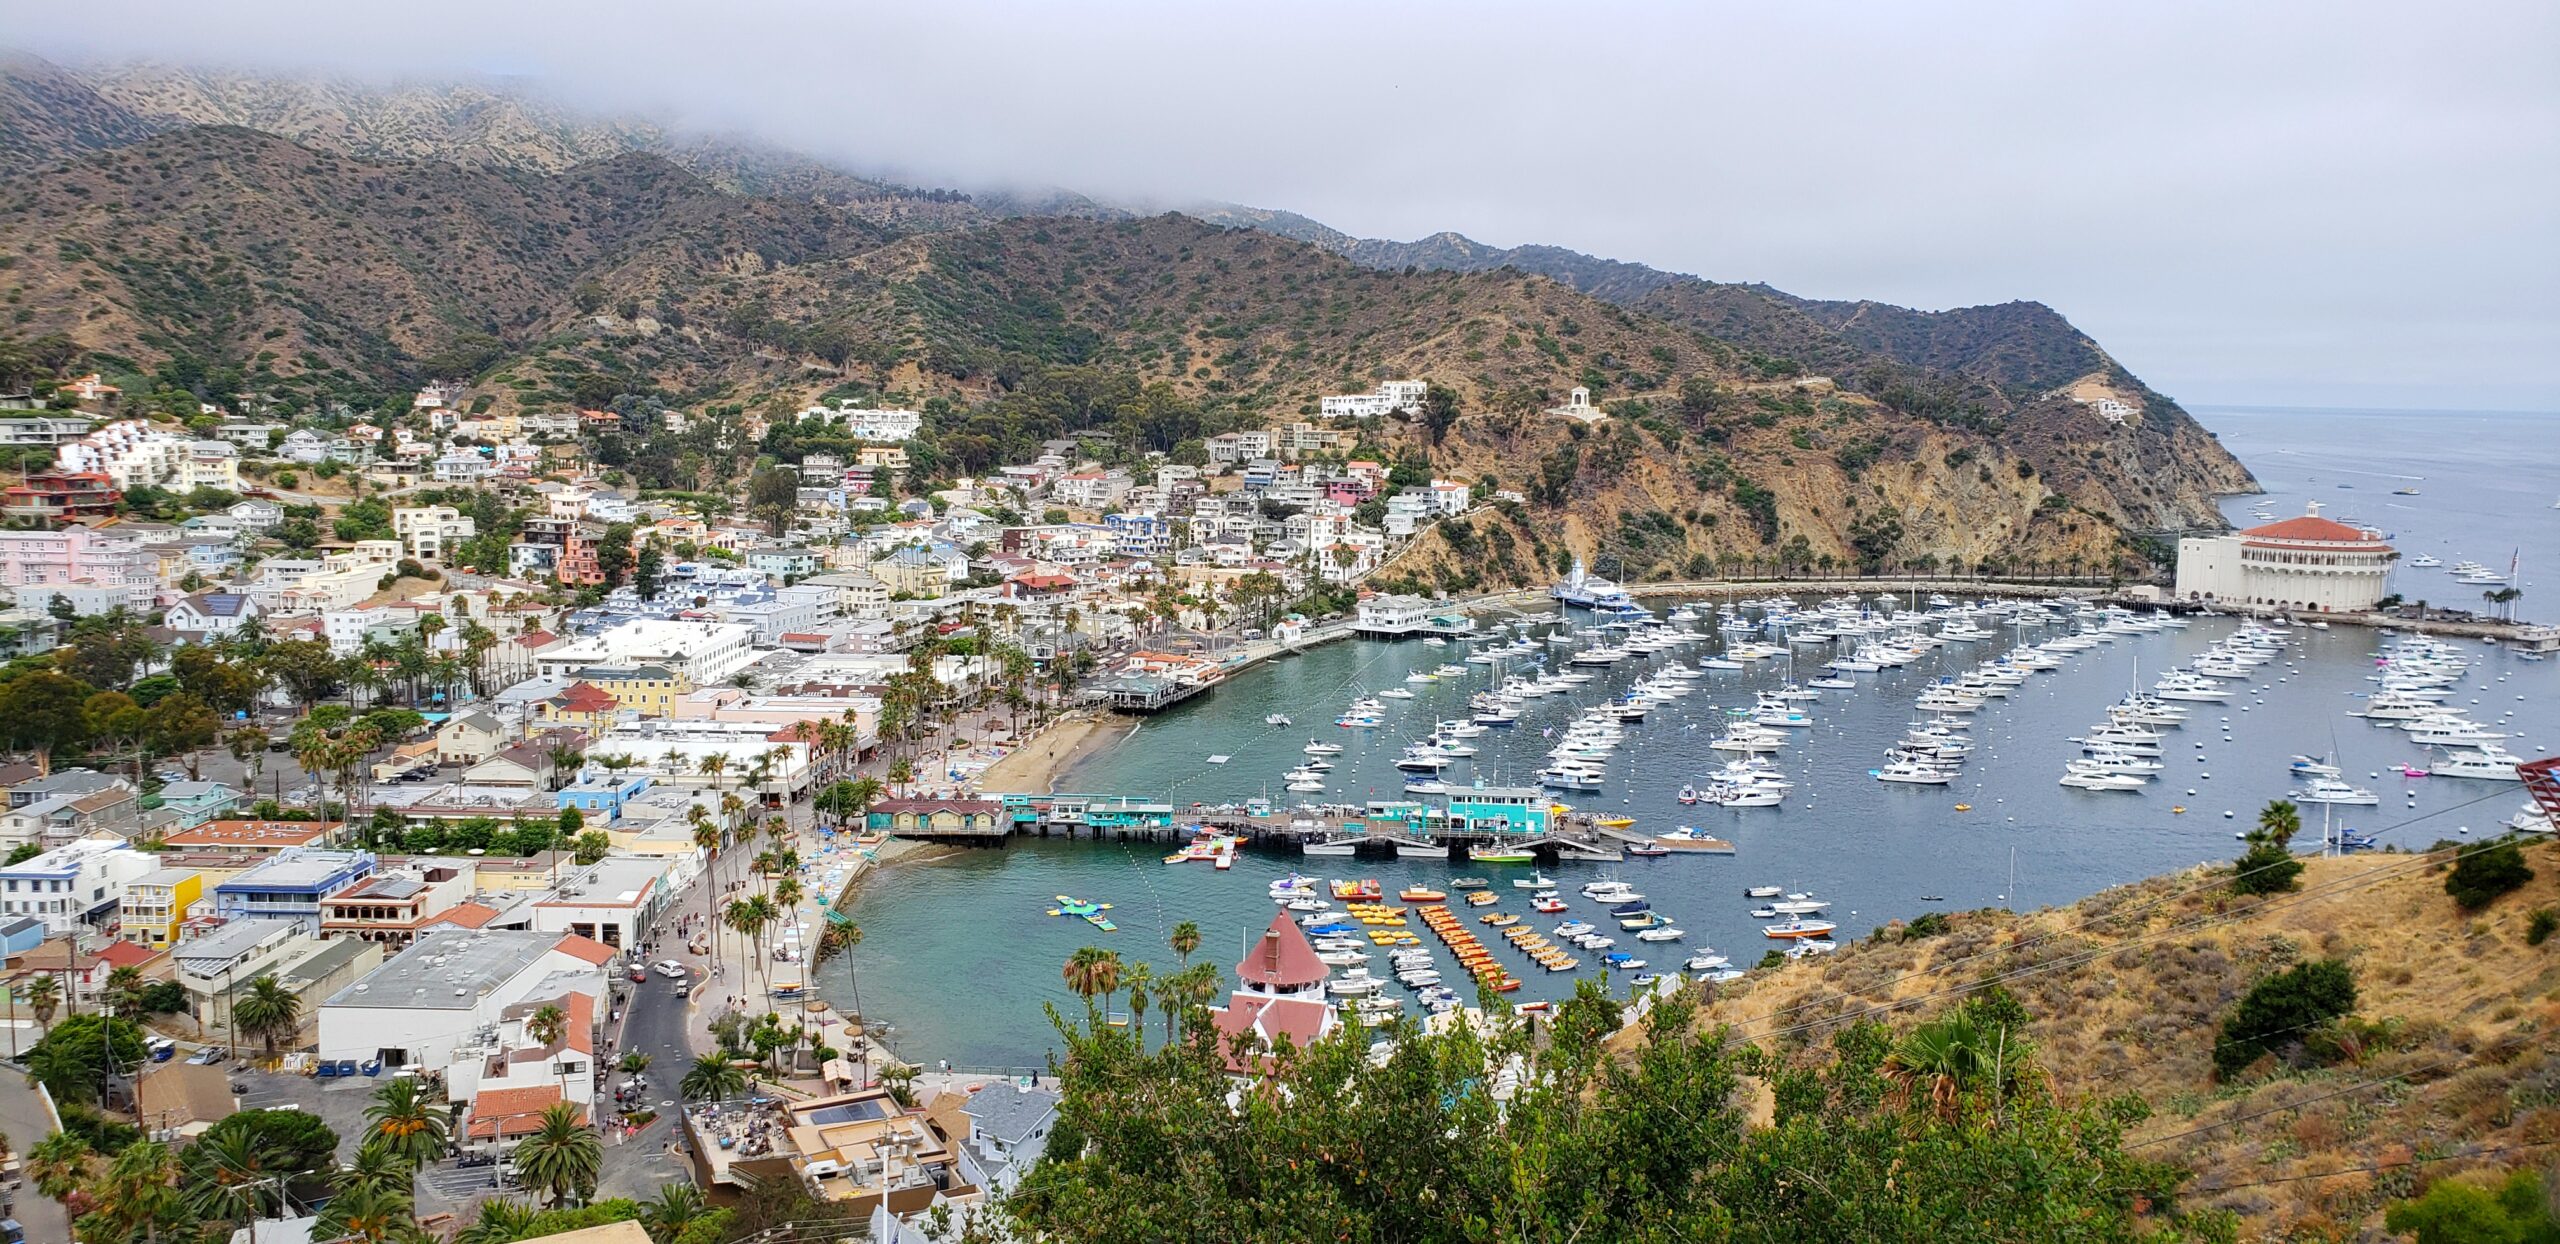 Catalina Island Offers At Least A Full Day of Fun, Relaxion and Adventure